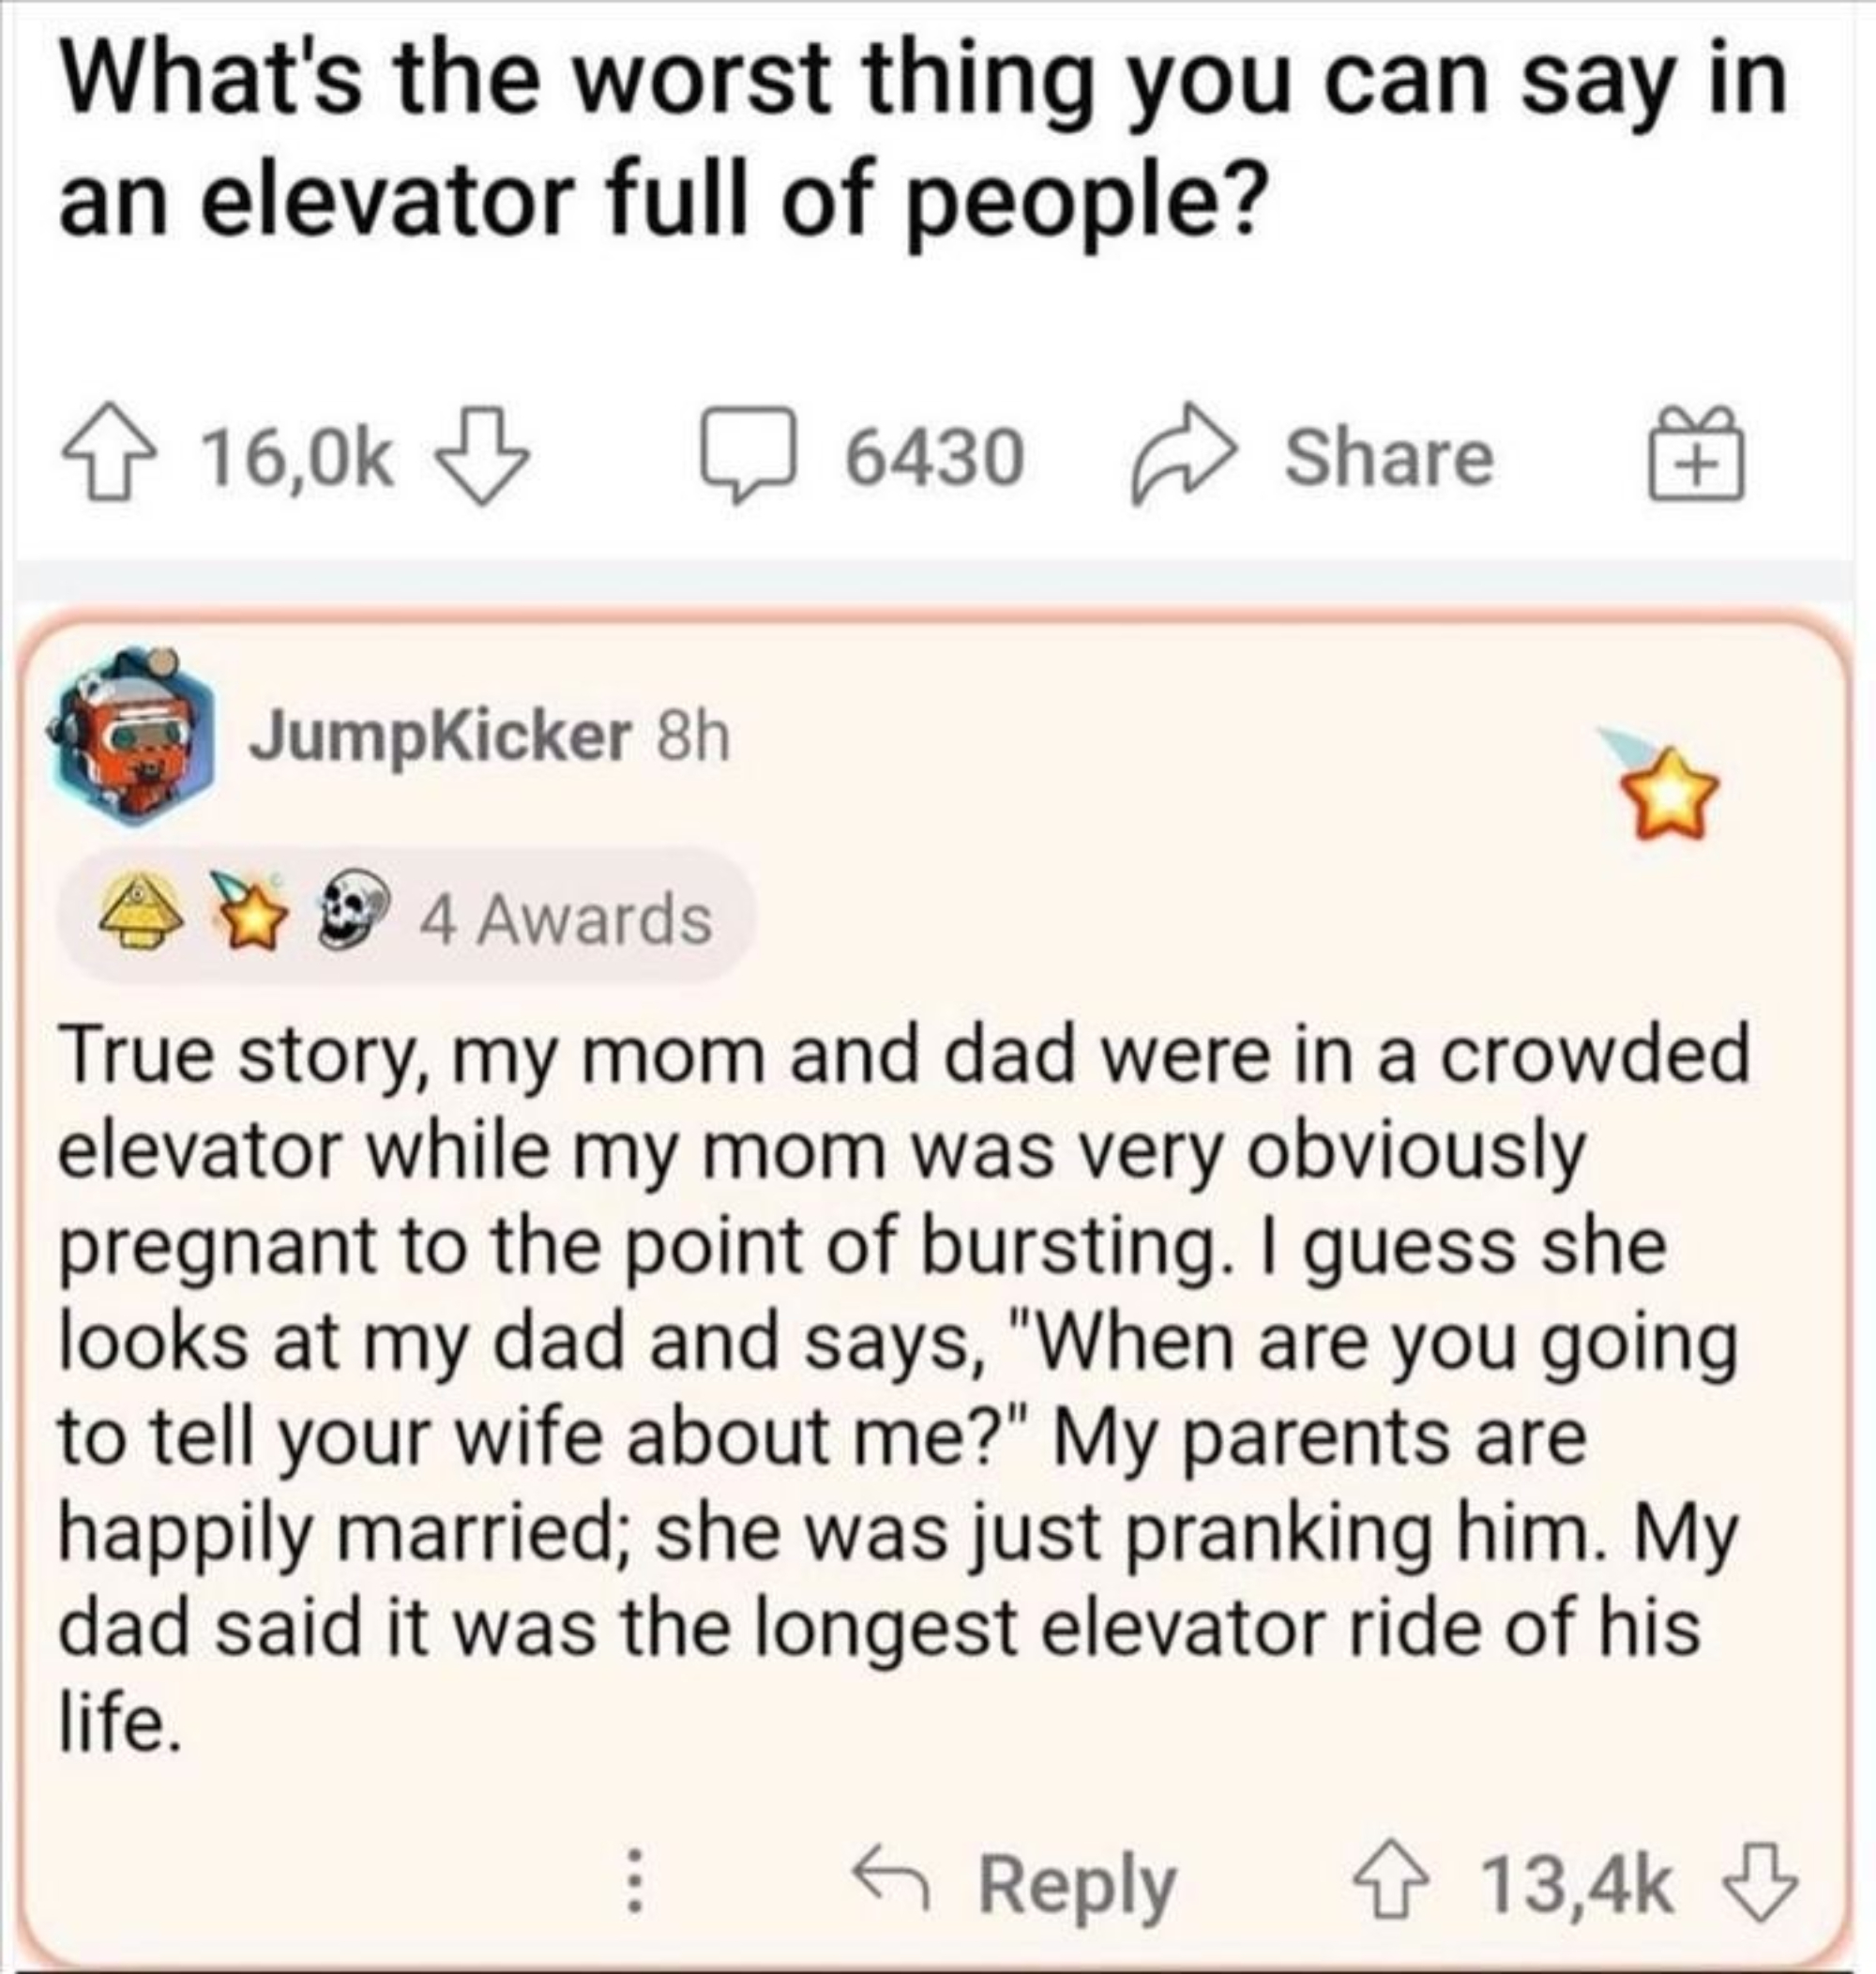 A screenshot of a social media post where a user shares an embarrassing story about their parents in an elevator